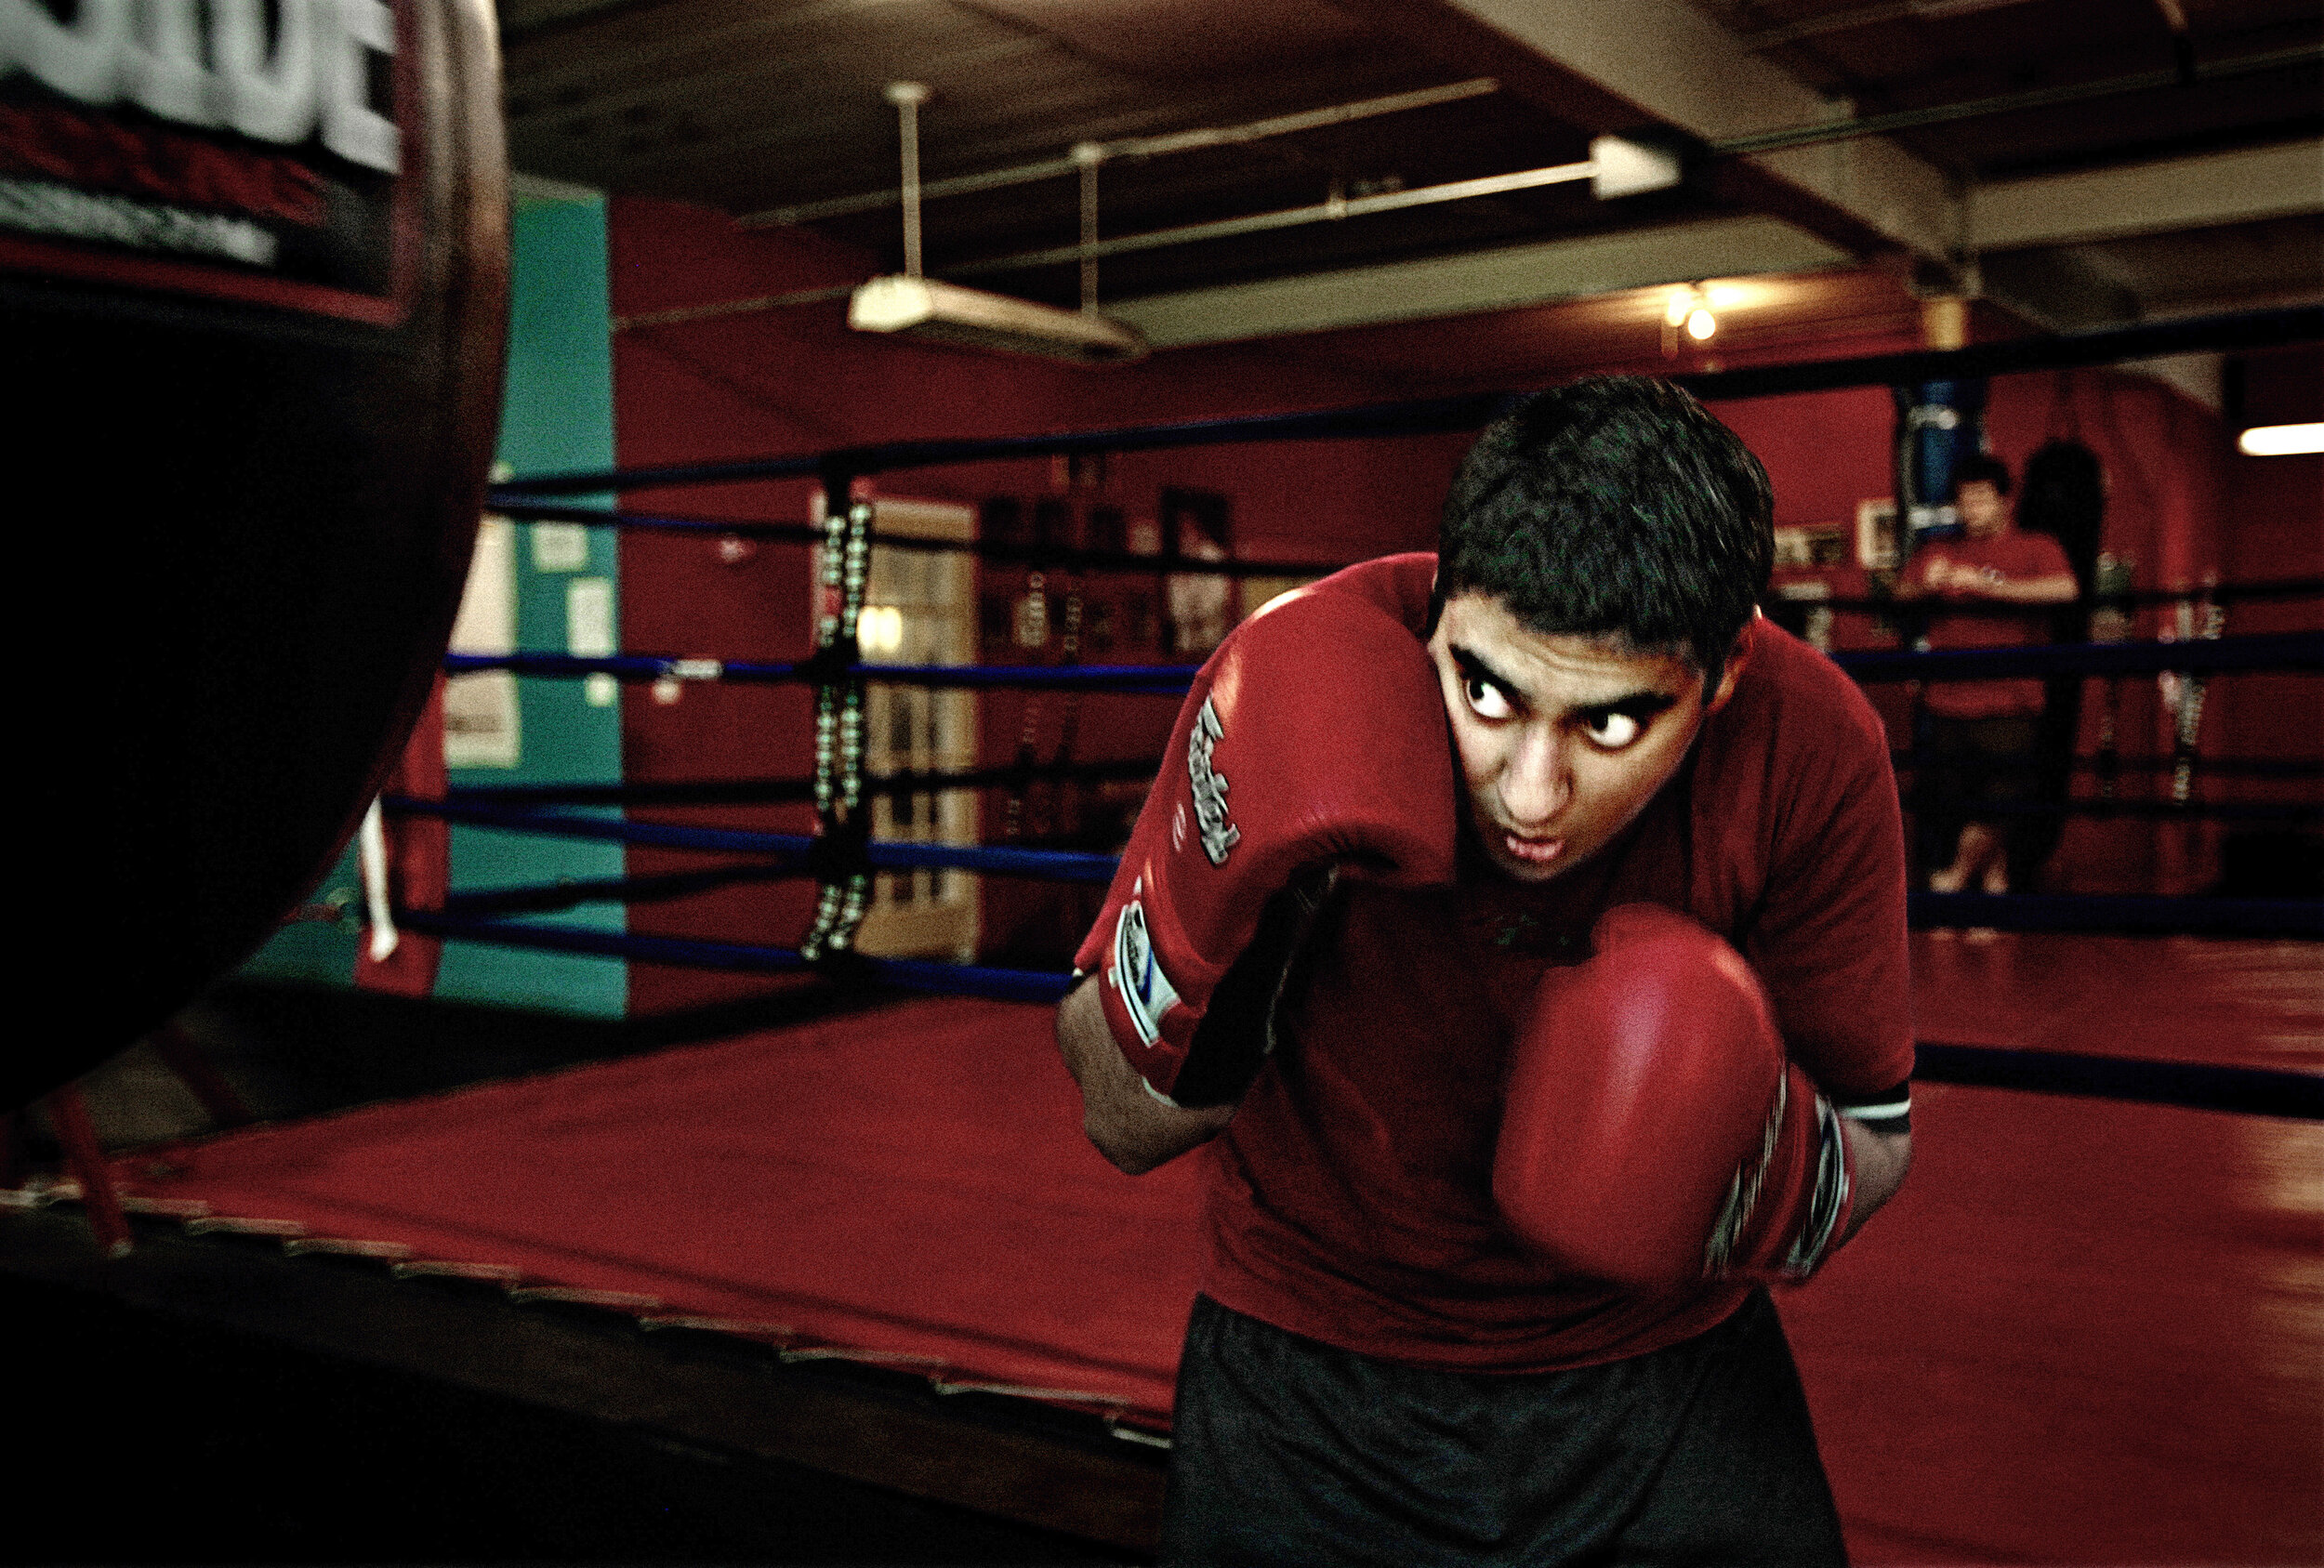   USA. Evanston, Illinois. 2010. Iqbal Shariff practices punch combinations at the Ultimate Fitness gymnasium. Iqbal said, “As a child I always thought that a situation similar to the French revolution would occur in my neighborhood and people will t